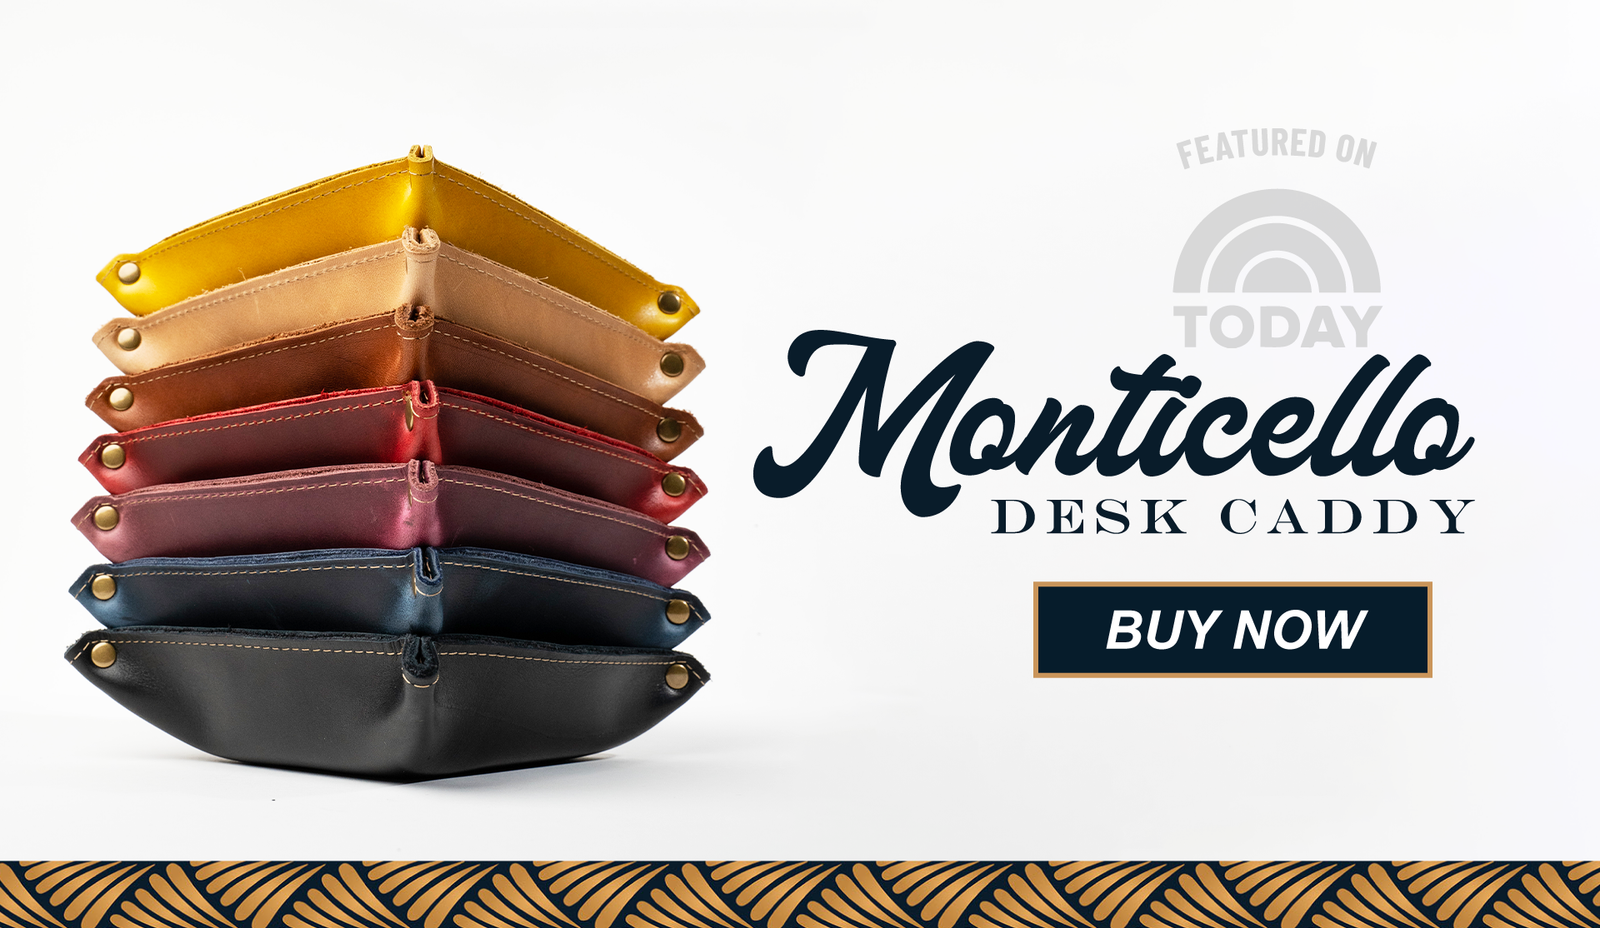 Full Grain Leather Desk Caddy Organizer with YOUR LOGO, The Monticello -  Holtz Leather